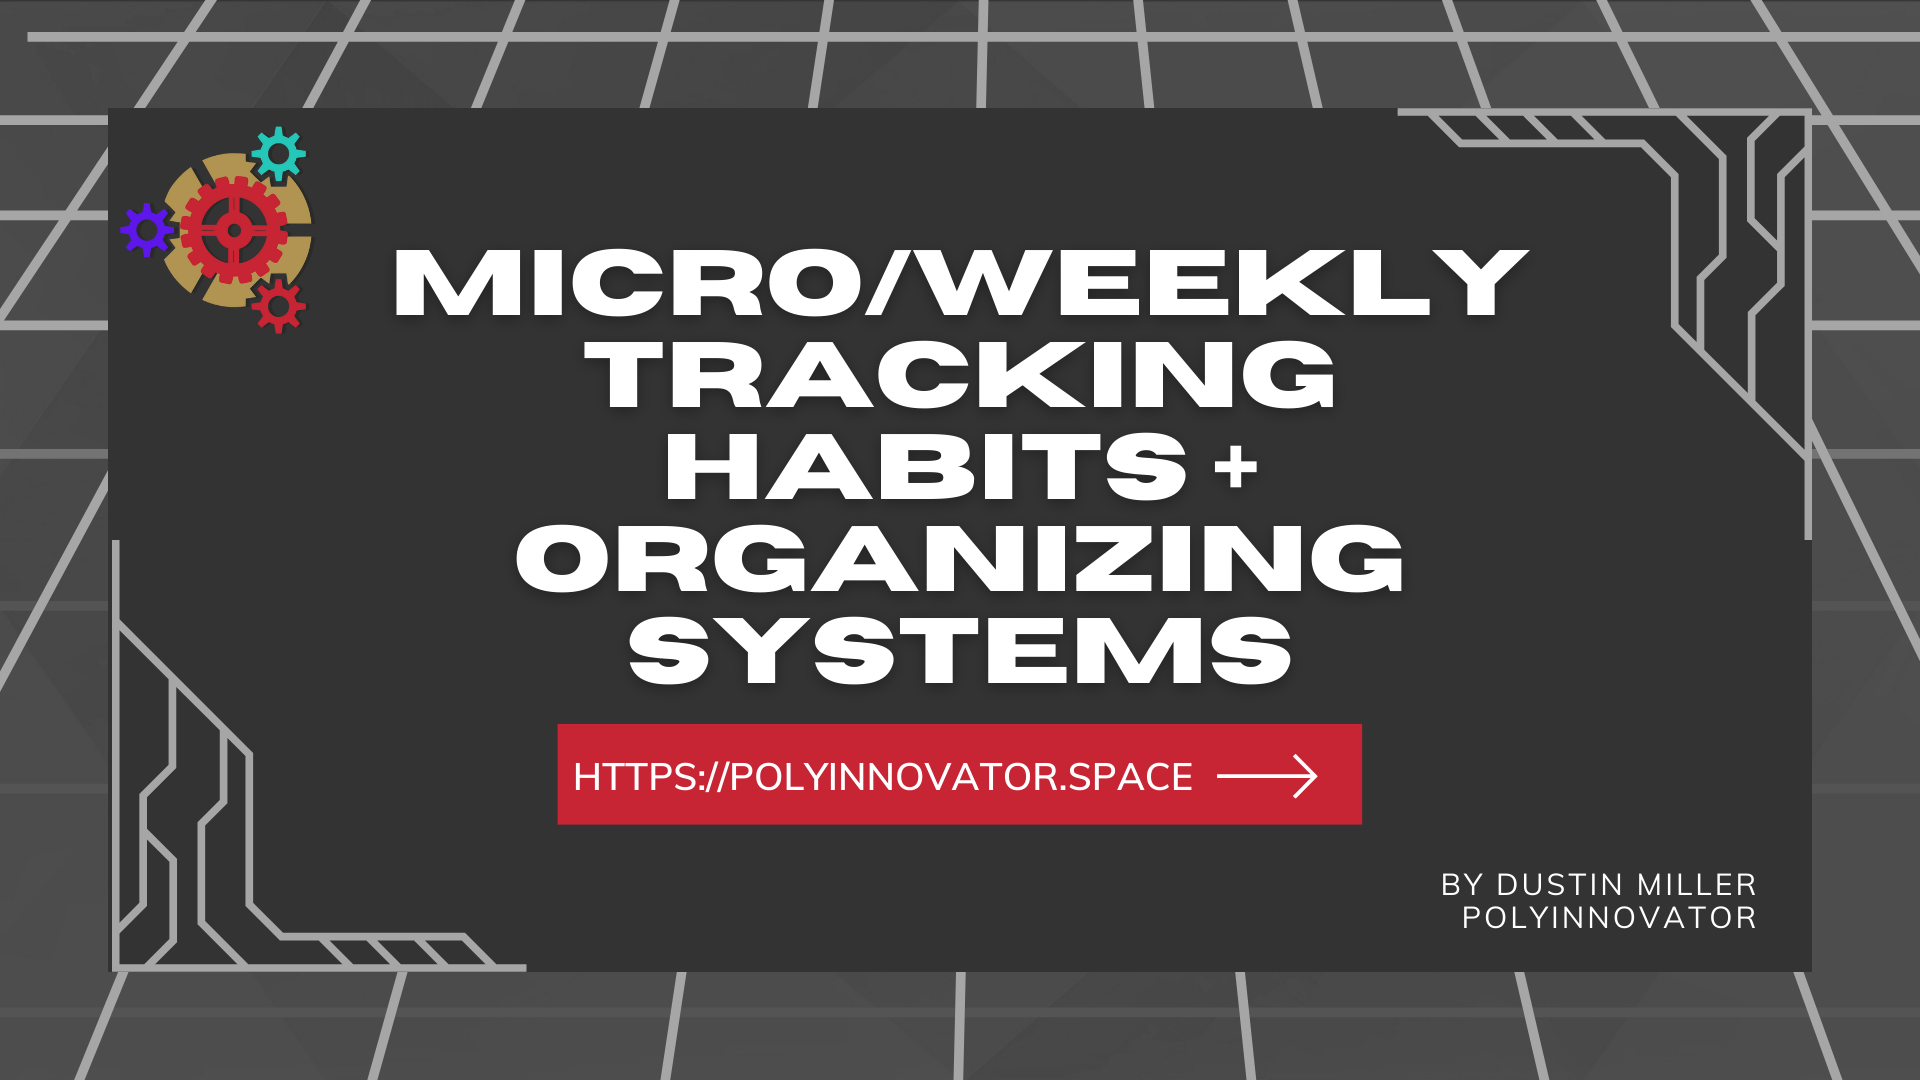 Micro/Weekly - Tracking Habits + Organizing Systems